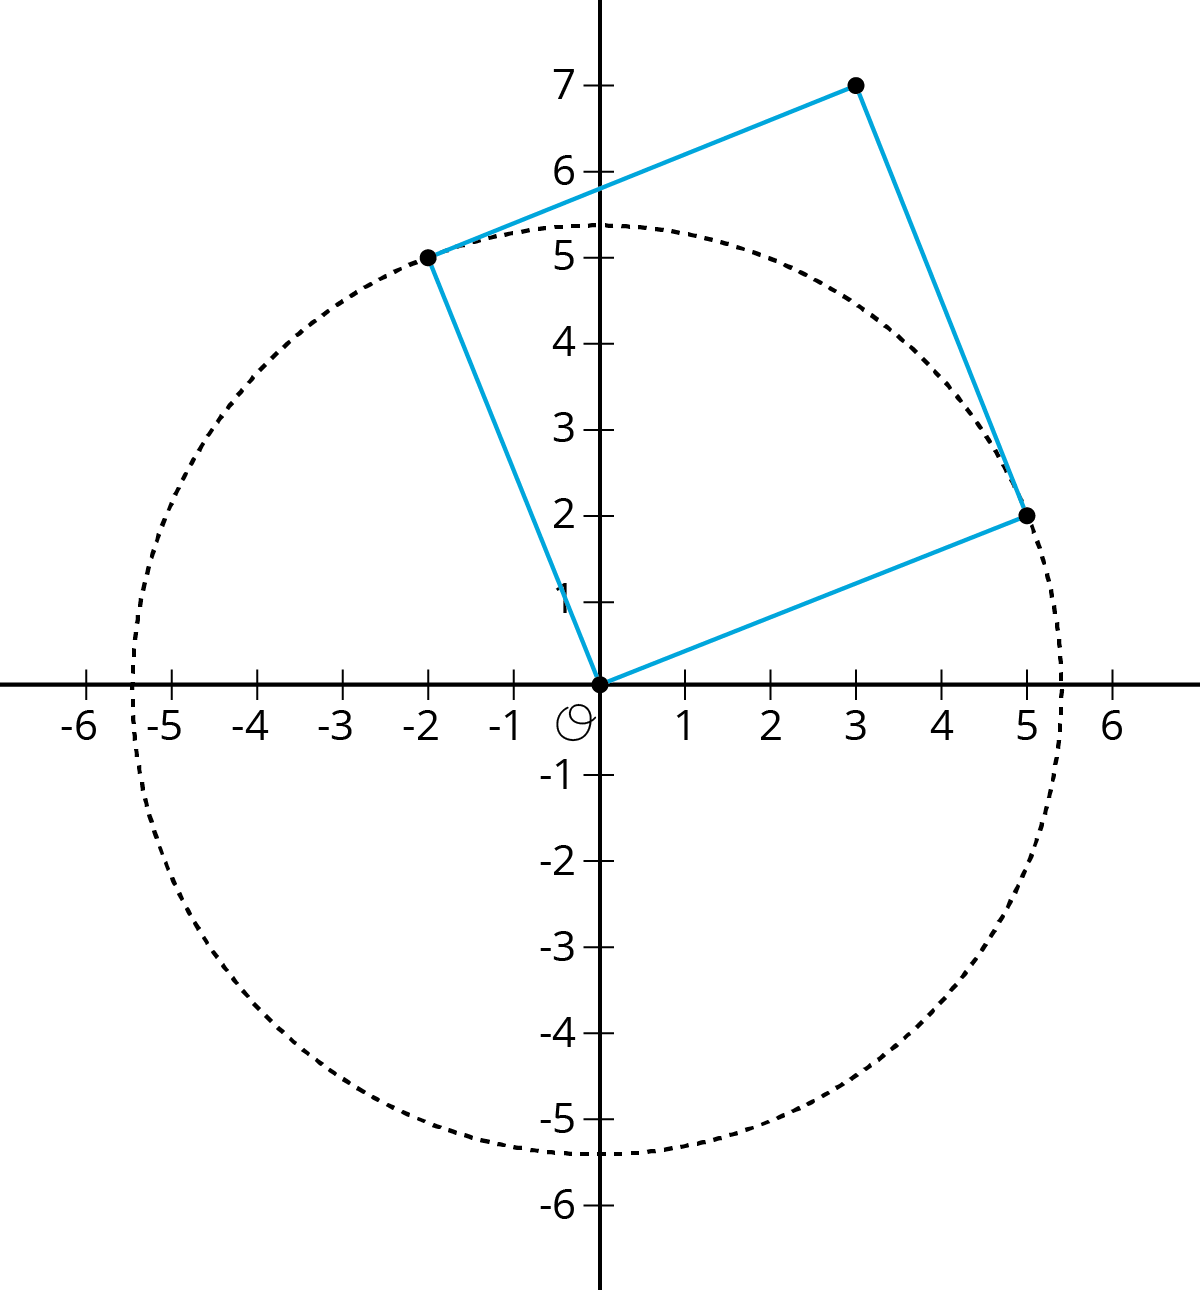 A coordinate plane with the origin labeled “O.” The x-axis has the numbers negative 6 through 6 indicated with tick marks. The y-axis has the numbers negative 6 through 7 indicated with tick marks. A square and a circle are drawn on the grid so that the circle’s circumference passes through 2 of the squares vertices. The circle’s center is the origin and it’s circumference is indicated by a dashed line that passes through the following approximate points on the axes: Negative 5 point 3 comma 0, 0 comma 5 point 3, 5 point 3 comma 0, and 0 comma negative 5 point 3.  The square is tilted so that all its sides are diagonal to the coordinate grid. It has vertices at: 0 comma 0, negative 2 comma 5, 3 comma 7, and 5 comma 2. The circumference of the circle passes through the square’s vertices at negative 2 comma 5 and 5 comma 2 so that the sides of the square, extending from the origin to those 2 vertices, are within the circle. @Kia Johnson I didn't want to say that the sides of the square were the radius felt like taking away some of the cognitive demand) but felt a little wordy. REPLY 11:44 (Fixed some language, now that I am writing for same image on grid): A coordinate plane with the origin labeled “O.” The x-axis has the numbers negative 6 through 6 indicated with tick marks. The y-axis has the numbers negative 6 through 7 indicated with tick marks. A square and a circle are drawn on the plane so that the circle’s circumference passes through 2 of the squares vertices. The circle’s center is the origin and it’s circumference is indicated by a dashed line that passes through the following approximate points on the axes: Negative 5 point 3 comma 0, 0 comma 5 point 3, 5 point 3 comma 0, and 0 comma negative 5 point 3.  The square is tilted so that all its sides are diagonal to the coordinate grid. It has vertices at: 0 comma 0, negative 2 comma 5, 3 comma 7, and 5 comma 2. The circumference of the circle passes through the square’s vertices at negative 2 comma 5 and 5 comma 2 so that the sides of the square, extending from the origin to those 2 vertices, are within the circle.